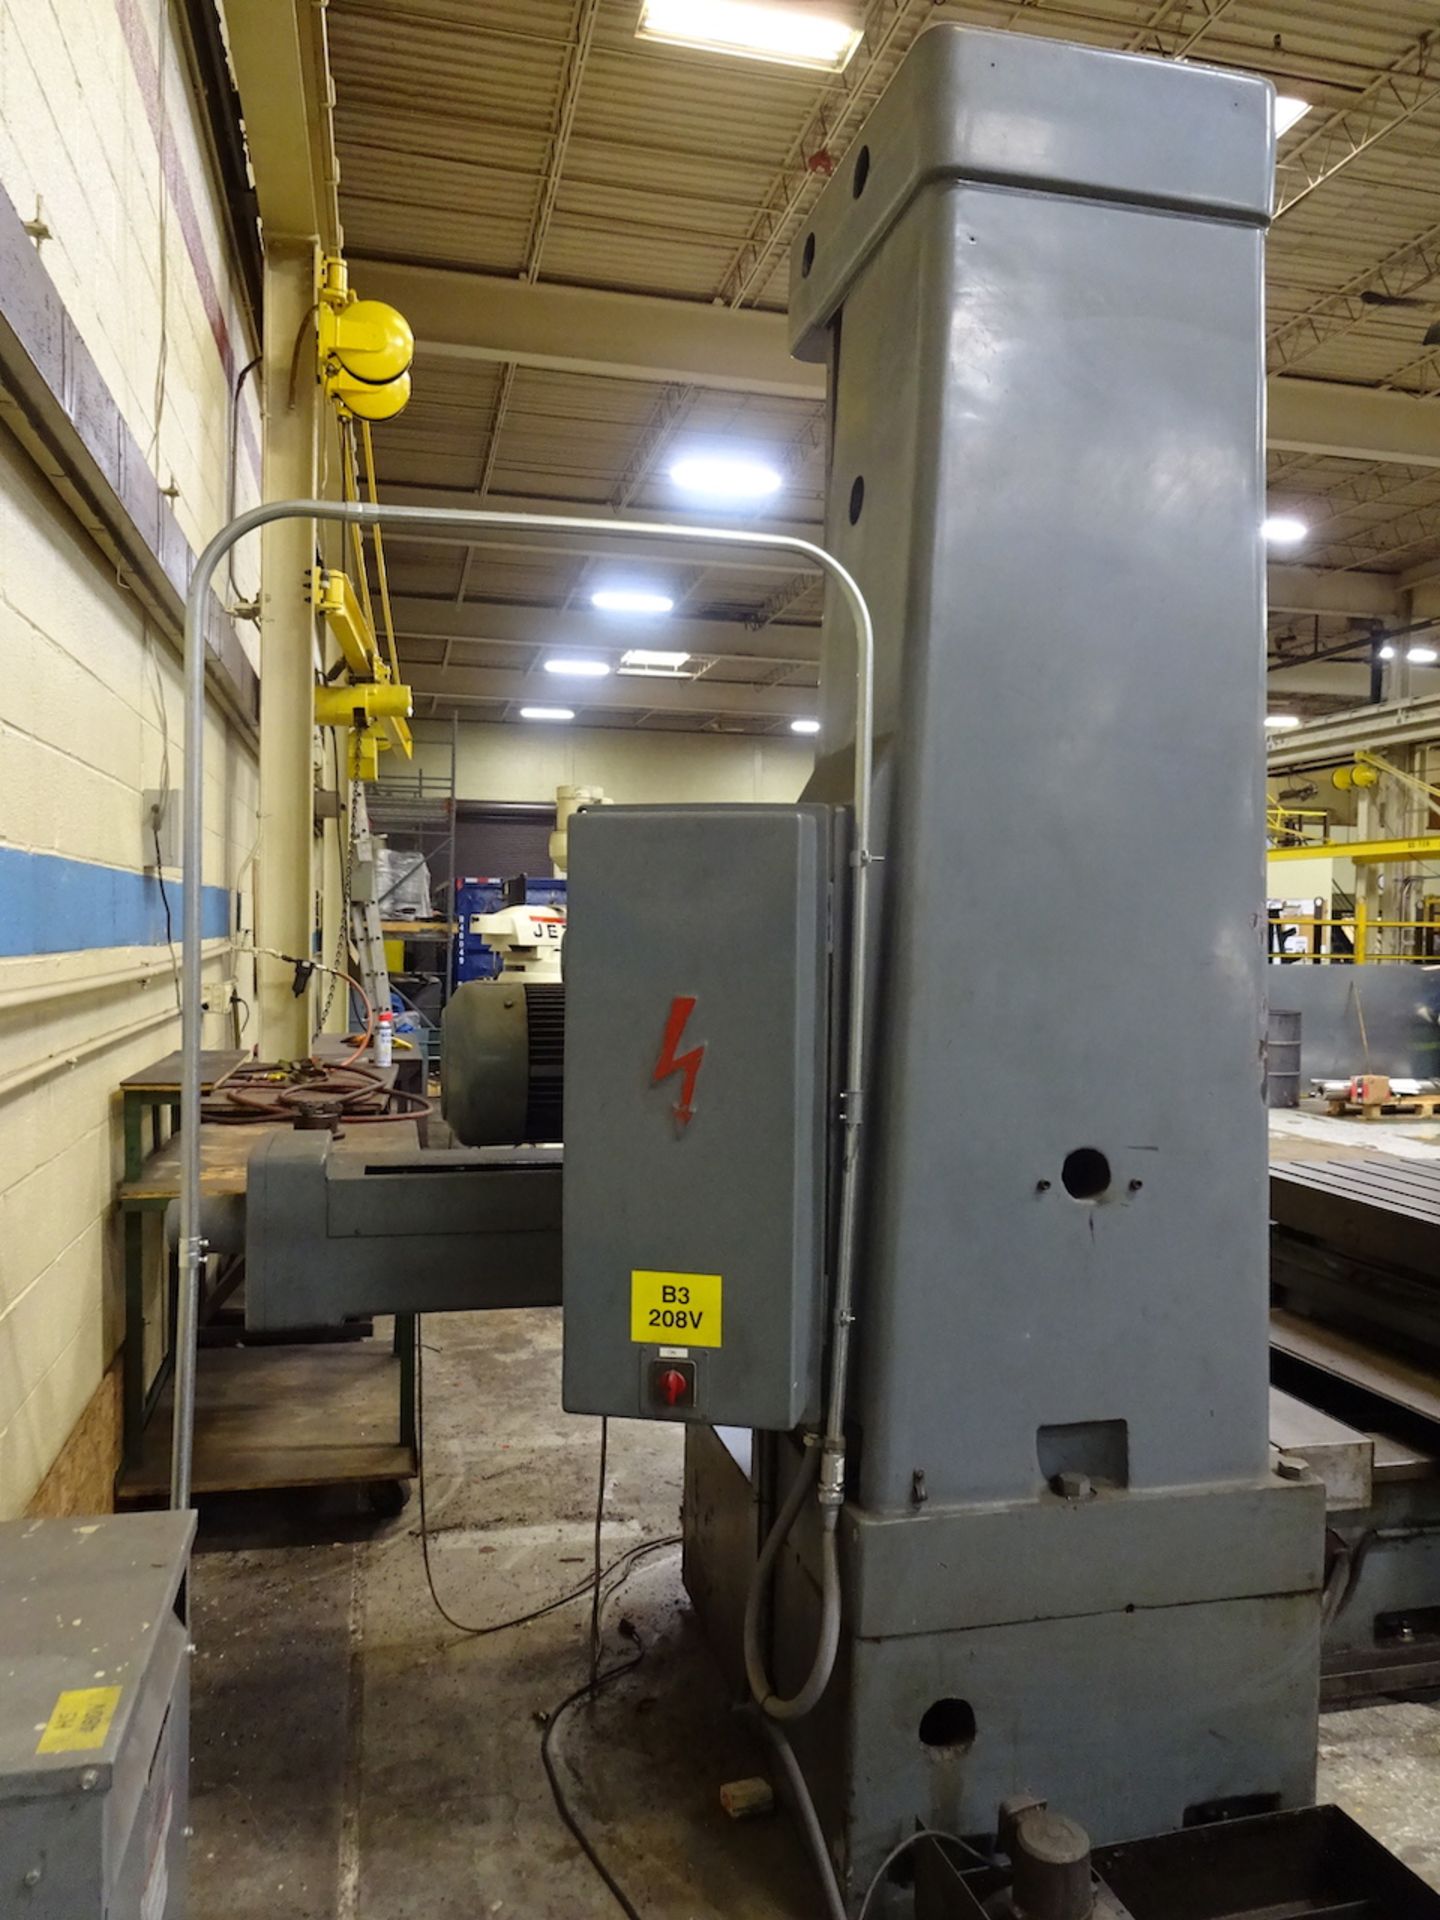 MEUSER MODEL M76BFS HORIZONTAL BORING MILL, S/N M76BFS-45286, 39 X 39 BUILT-IN ROTARY TABLE, 7. - Image 4 of 20